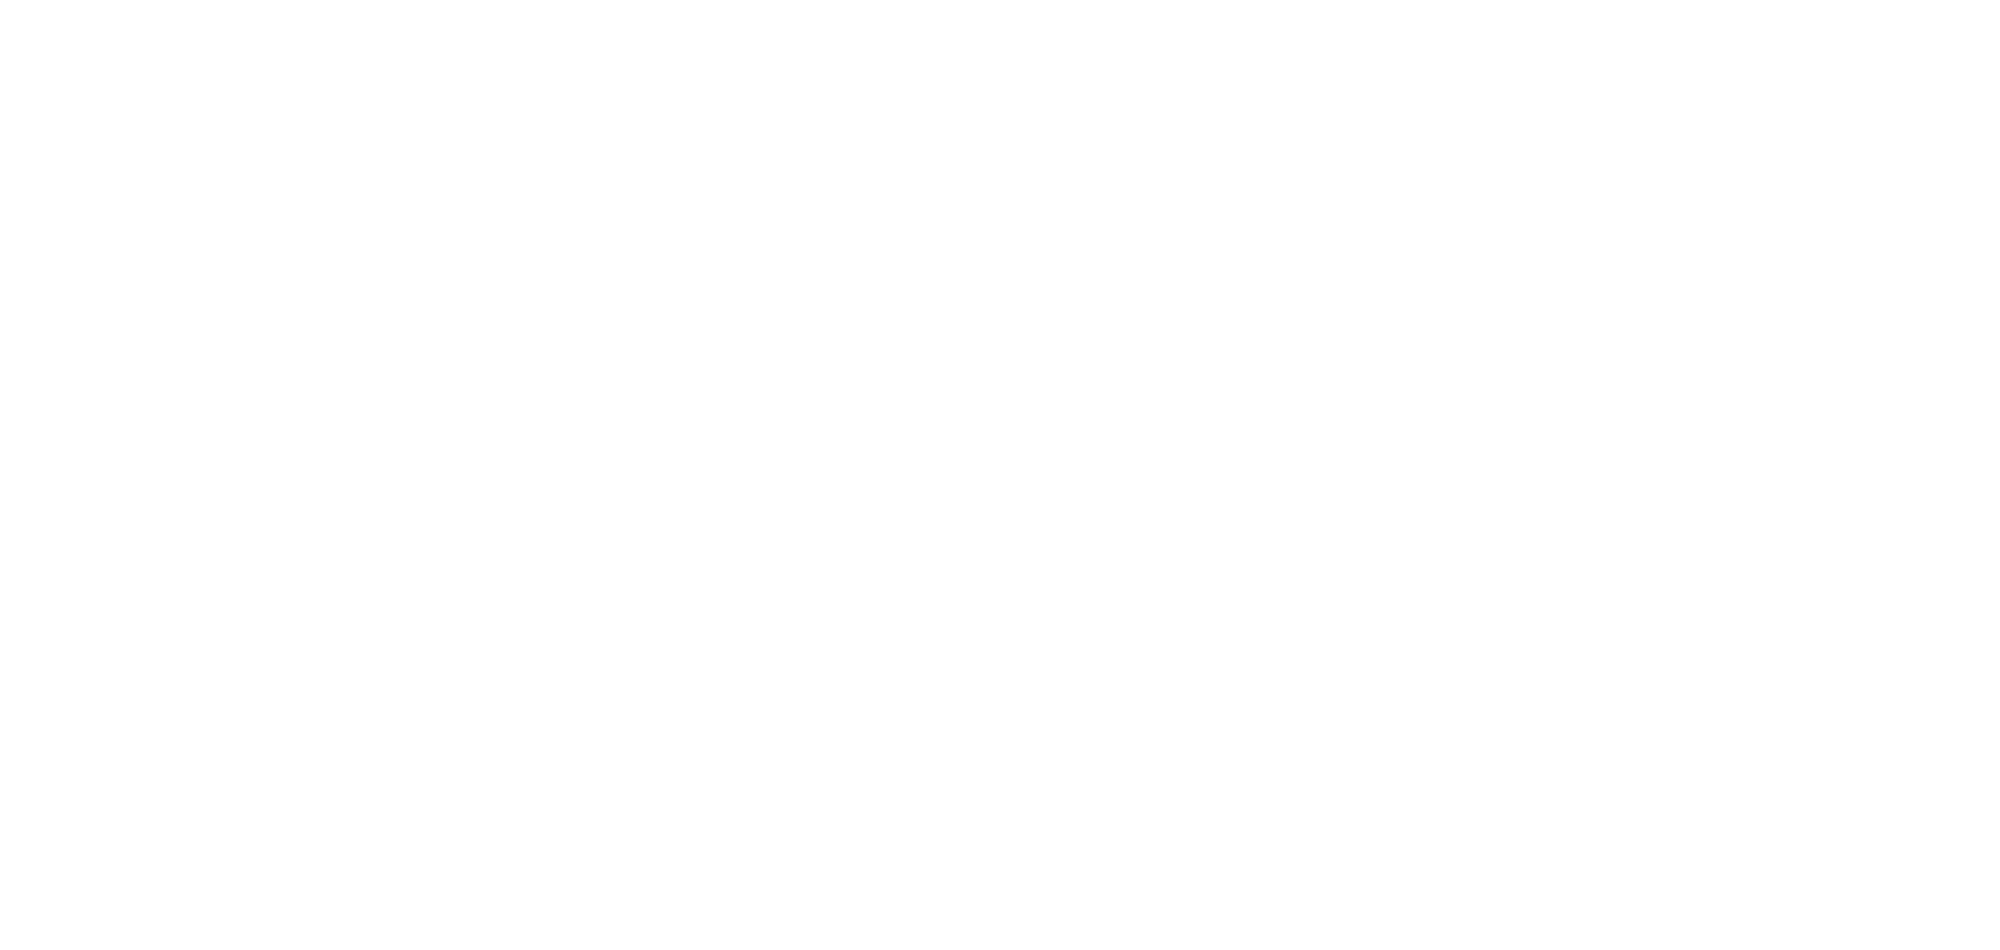 Lublin - city of inspiration